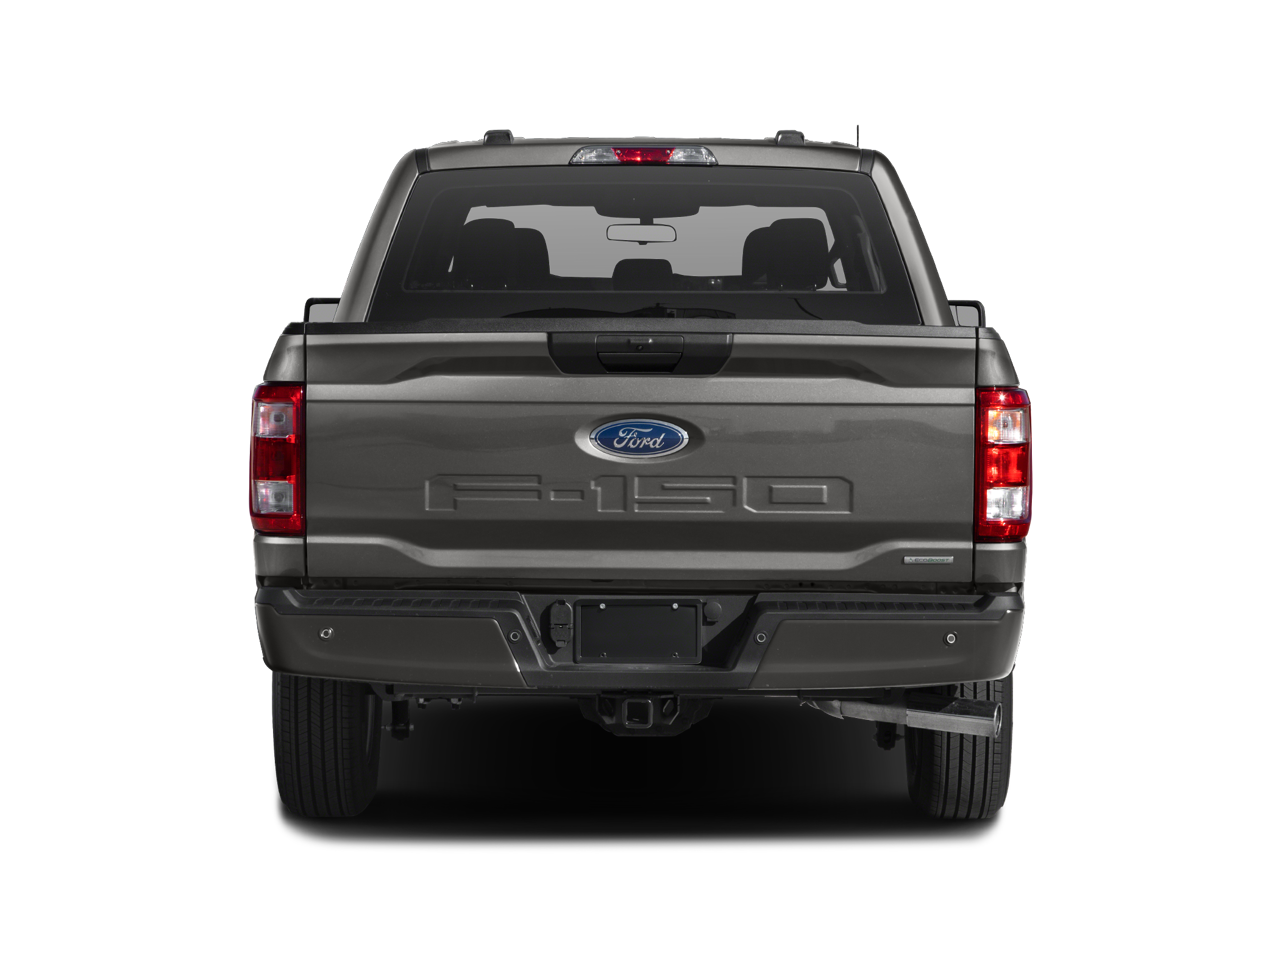 2022 Ford F-150 XLT Trailer Tow Package AppLink/Apple CarPlay and Andr